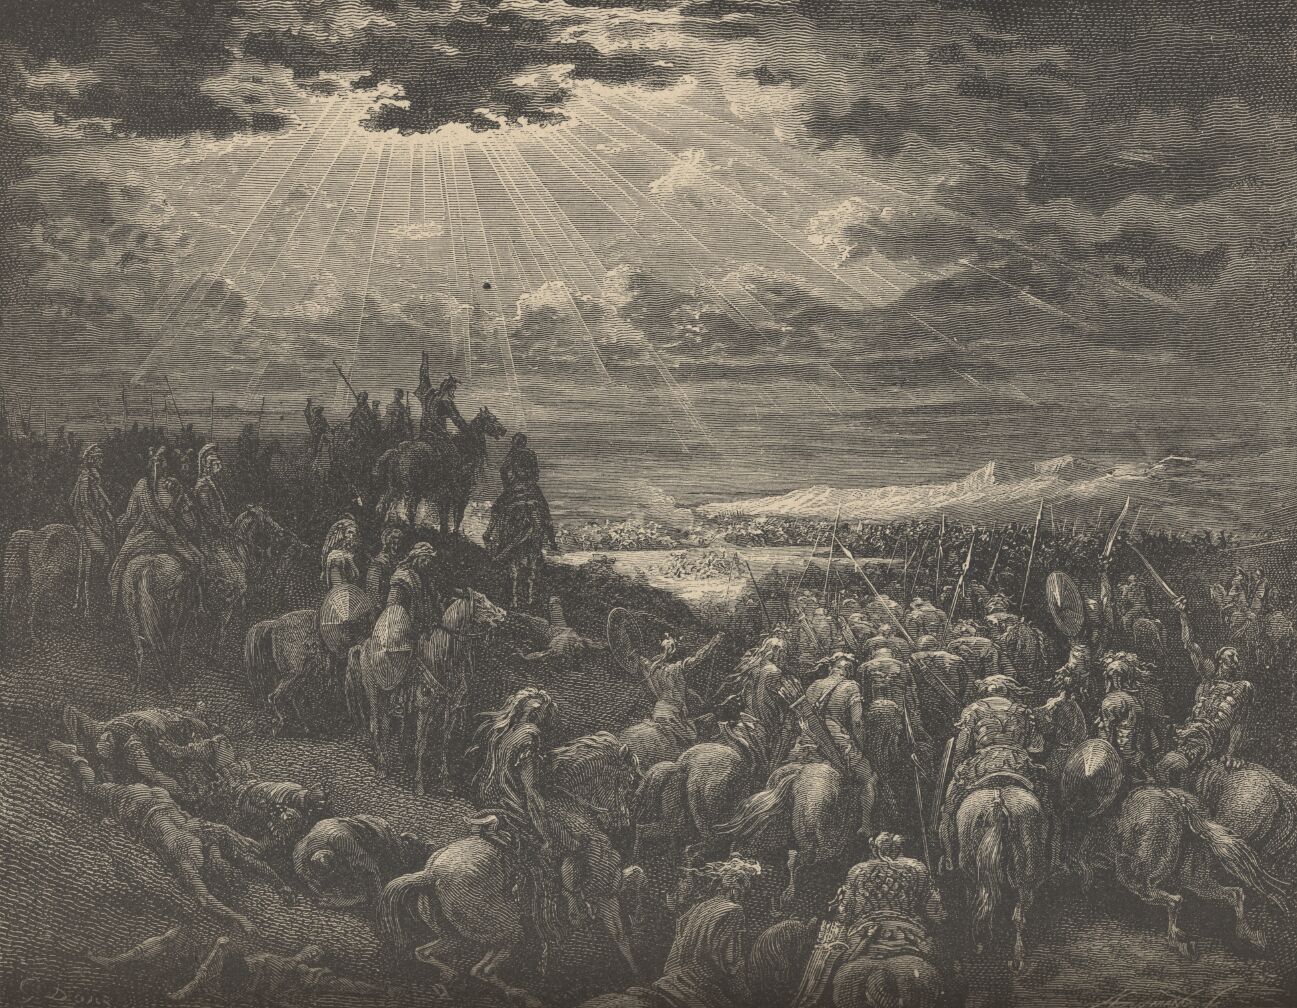 Dore Bible Illustrations: THE WAR AGAINST GIBEON, Image 39 of 413  -  376 kB